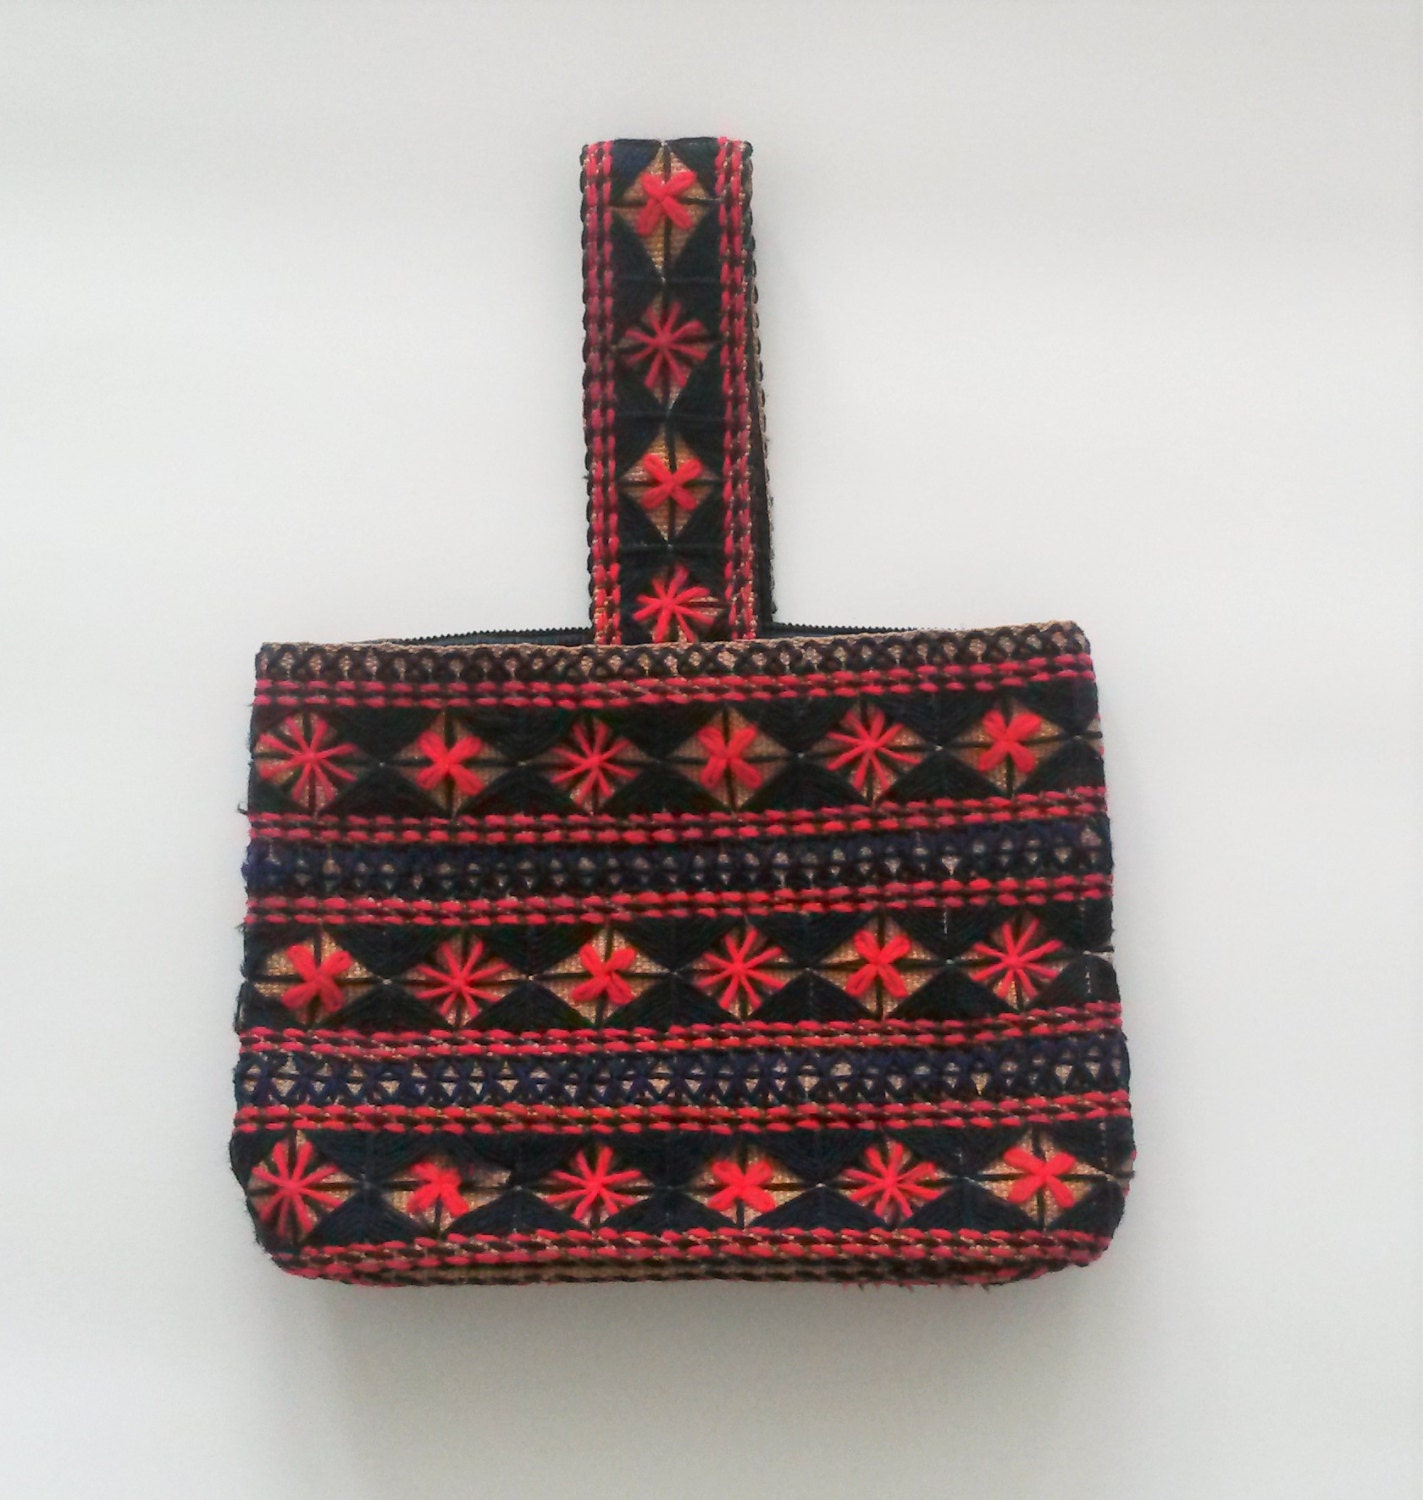 Vintage 1970s Blue and Red Embroidered Purse 70s Purse 70s - Etsy